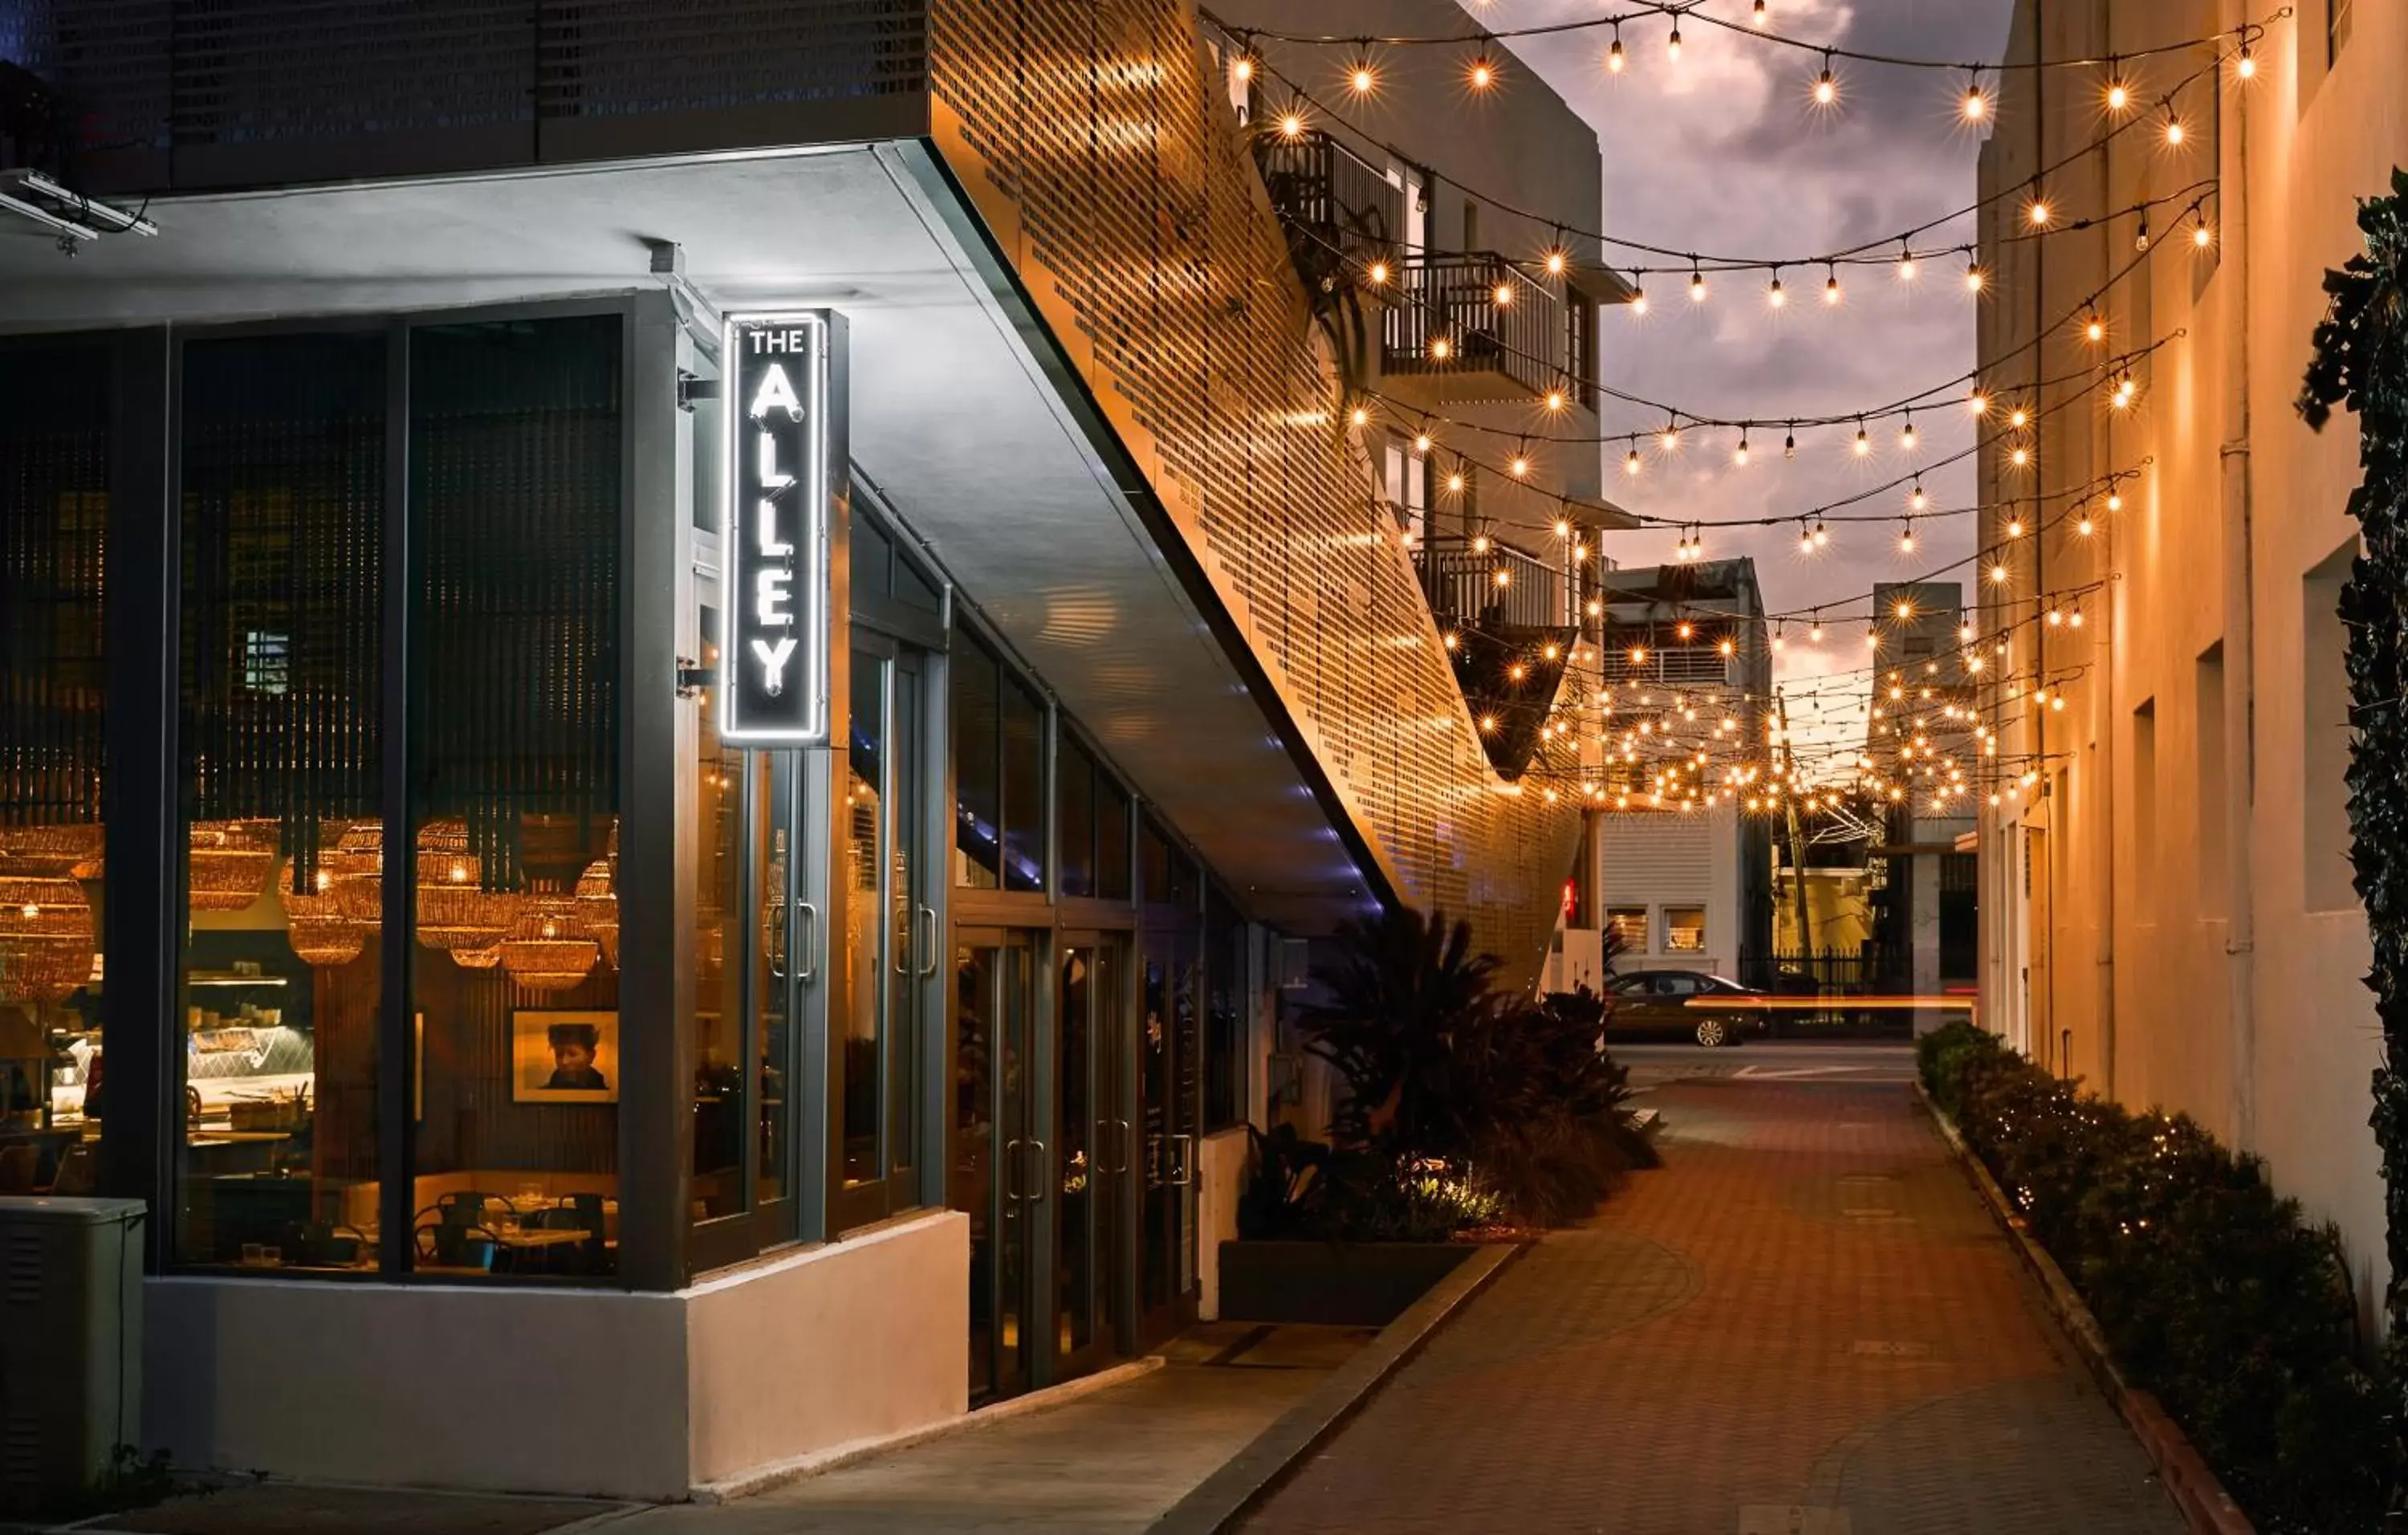 Restaurant/places to eat in The Betsy Hotel, South Beach